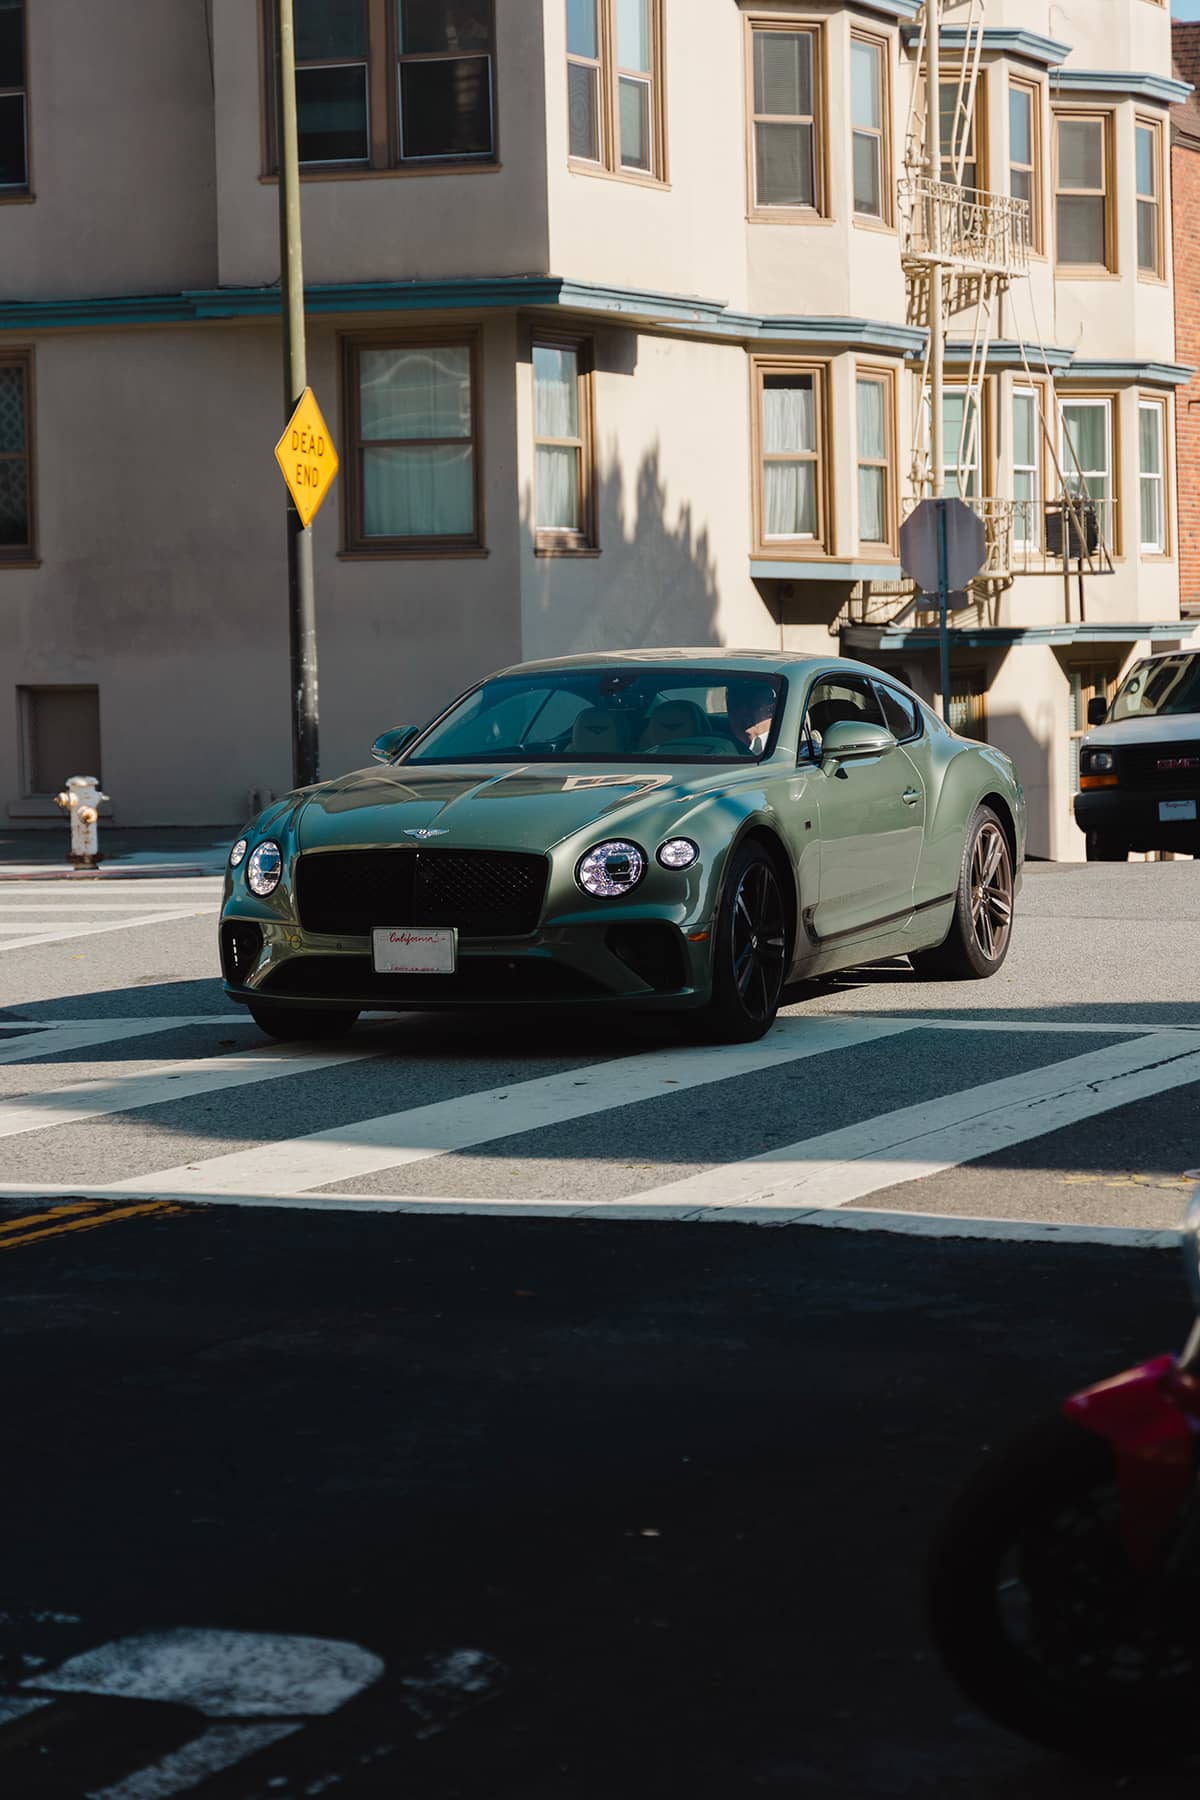 Late model Bentley Continental GT in a British Racing Green on San Francisco hills.